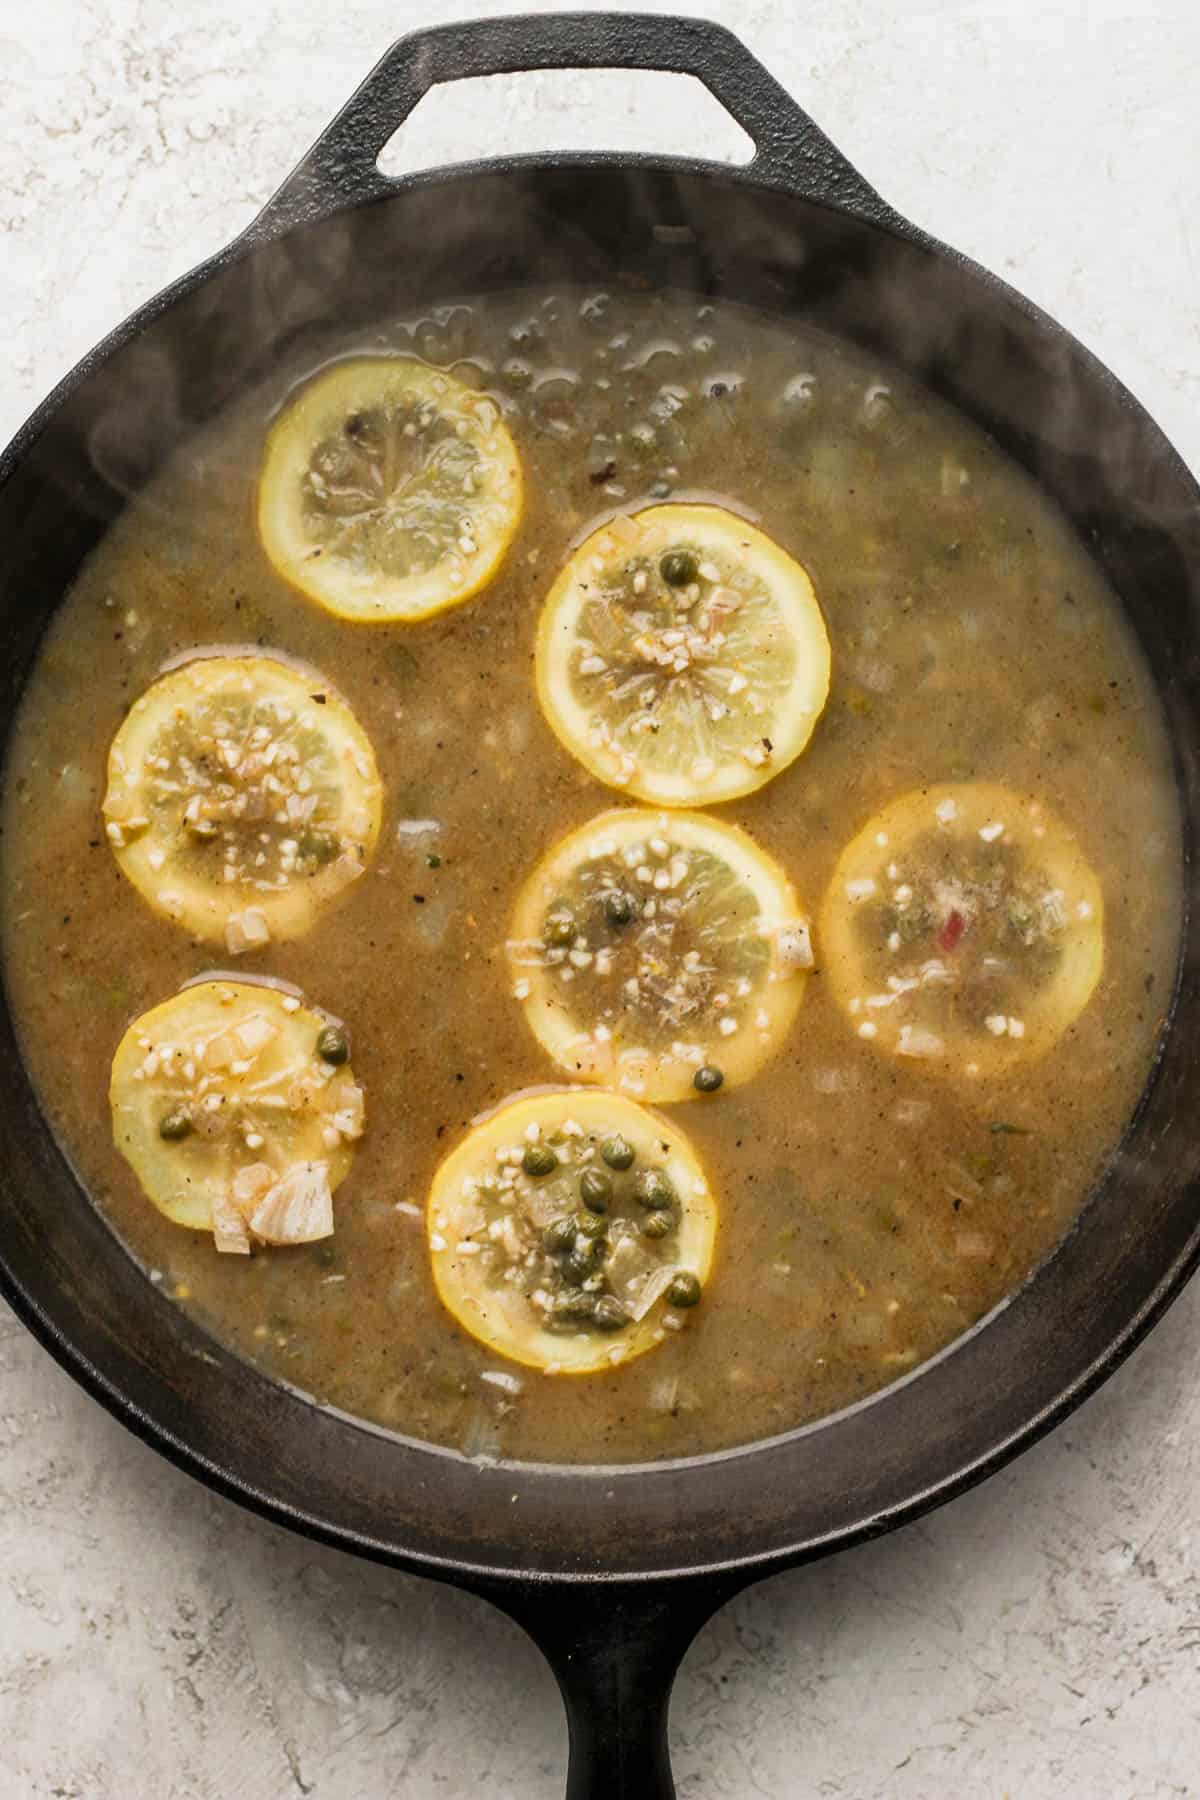 Chicken broth, white wine, lemon juice, lemon zest, lemon slices, and capers added to the pan.